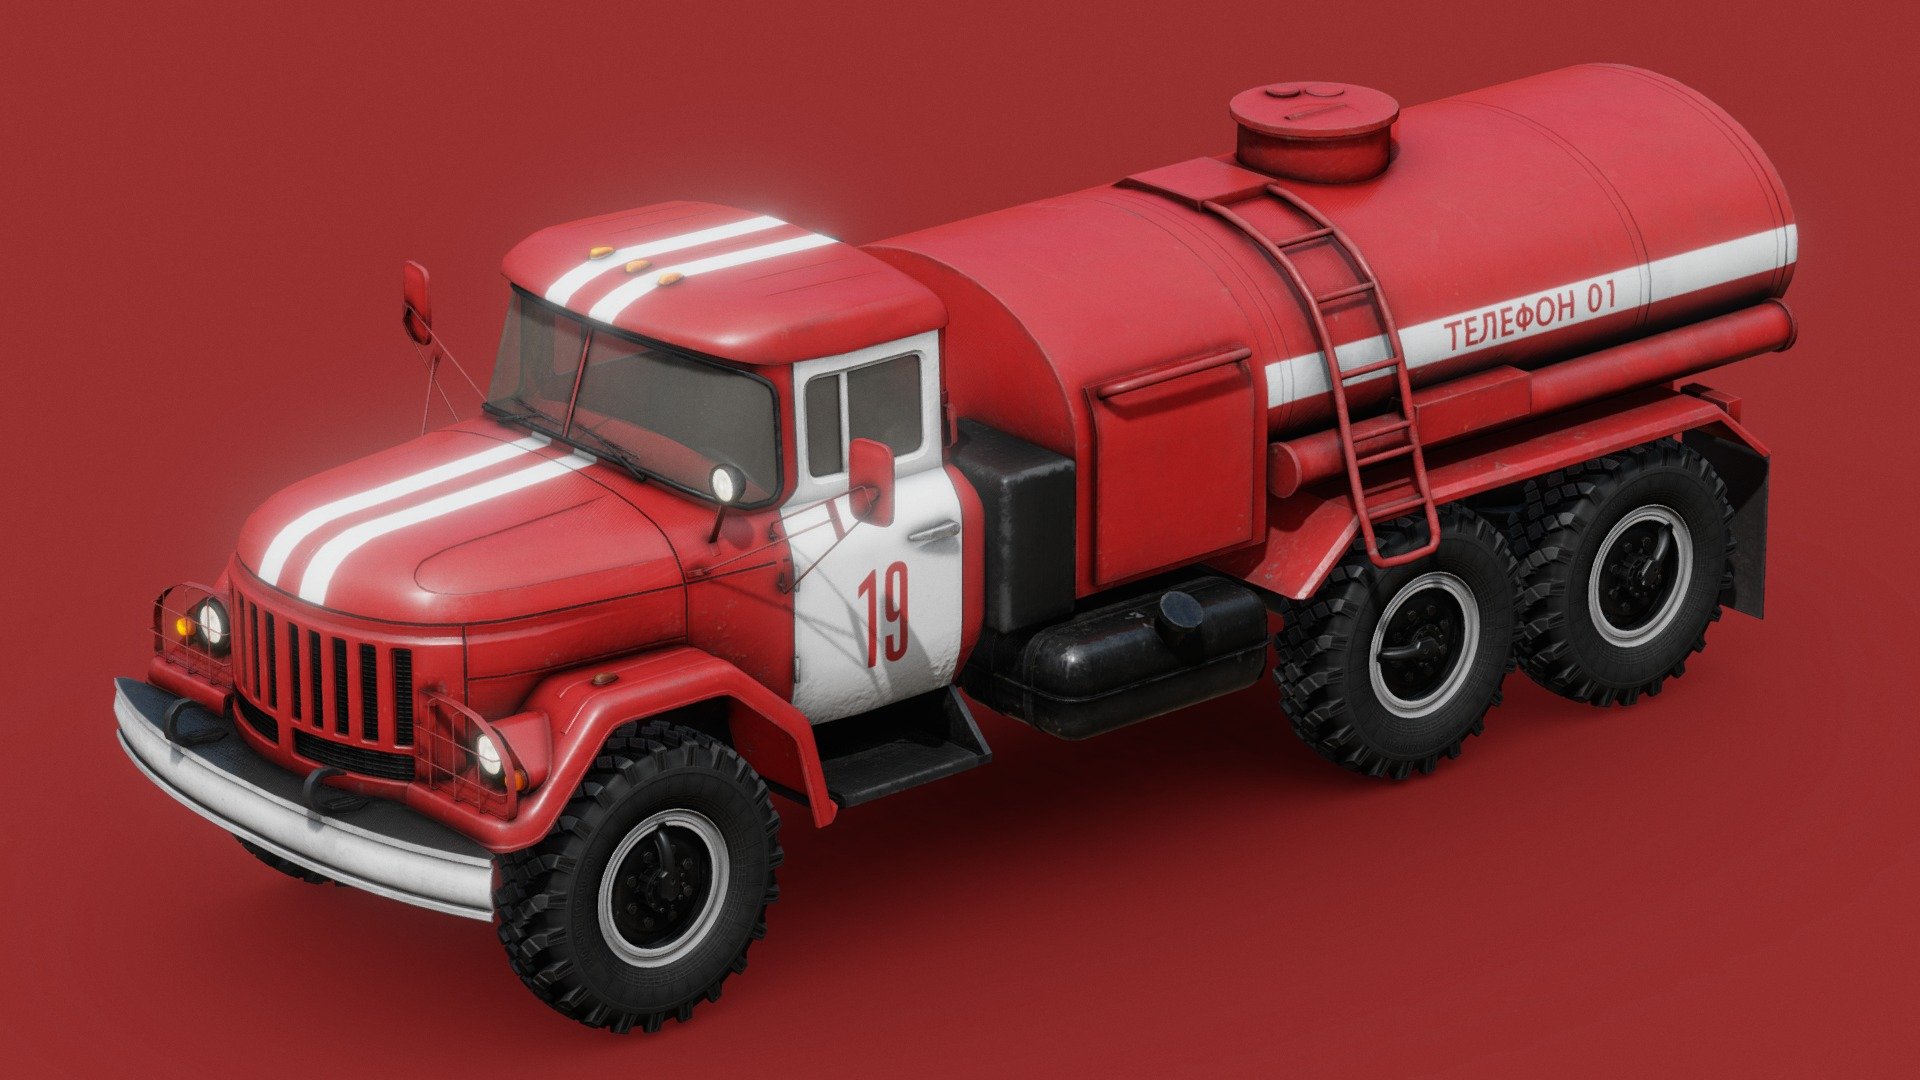 General purpose 3.5 tonne 6x6 army truck designed in the Soviet Union. Here, in Water Tanker Truck version.

Separate materials for: cabin, interior, glass, frame, wheel and tank.

Wheels are separate objects.

4k PBR textures for cabin, interior and tank. 2k for frame and wheel. 1k for the glass.

Textures for glass and command module with alpha transparency 3d model